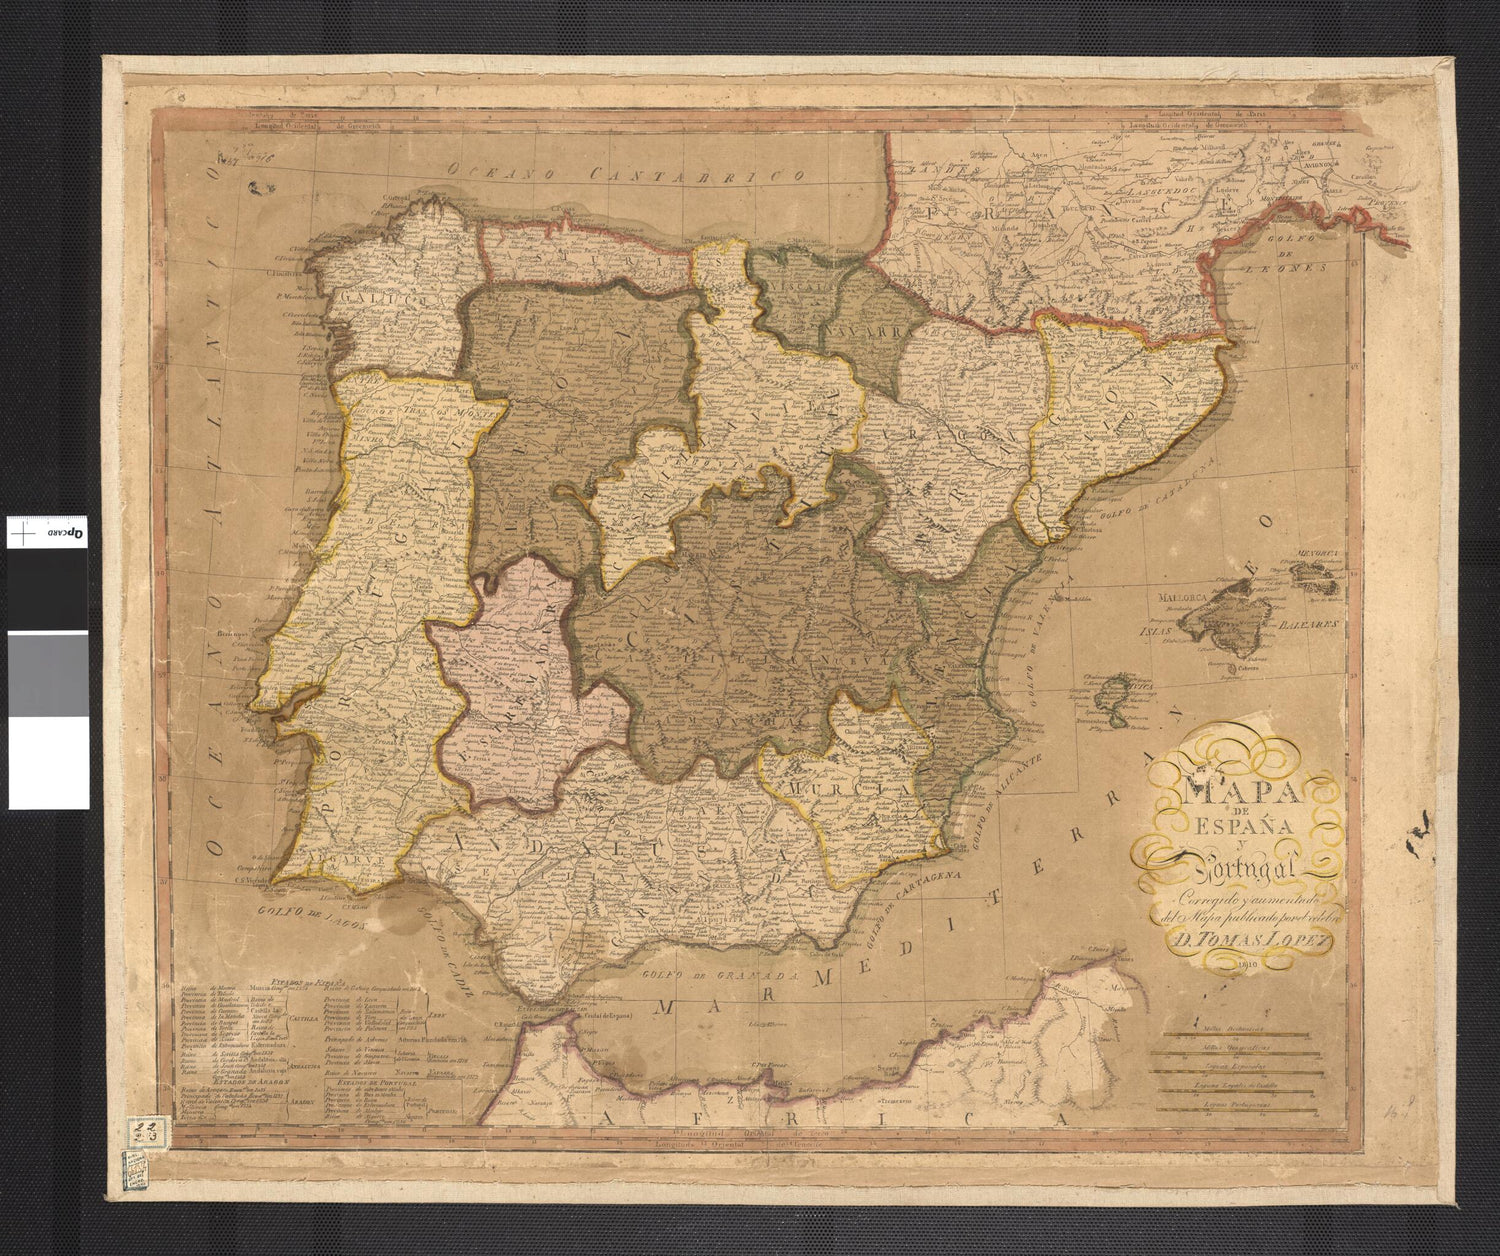 This old map of Map of Spain and Portugal, Corrected and Augmented from the Map Published by D. Tomas Lopez. (Mapa De España Y Portugal, Corregido Y Aumentado Do Mapa Publicado Por D. Tomas Lopez) from 1810 was created by Tomás López of Vargas Machuca